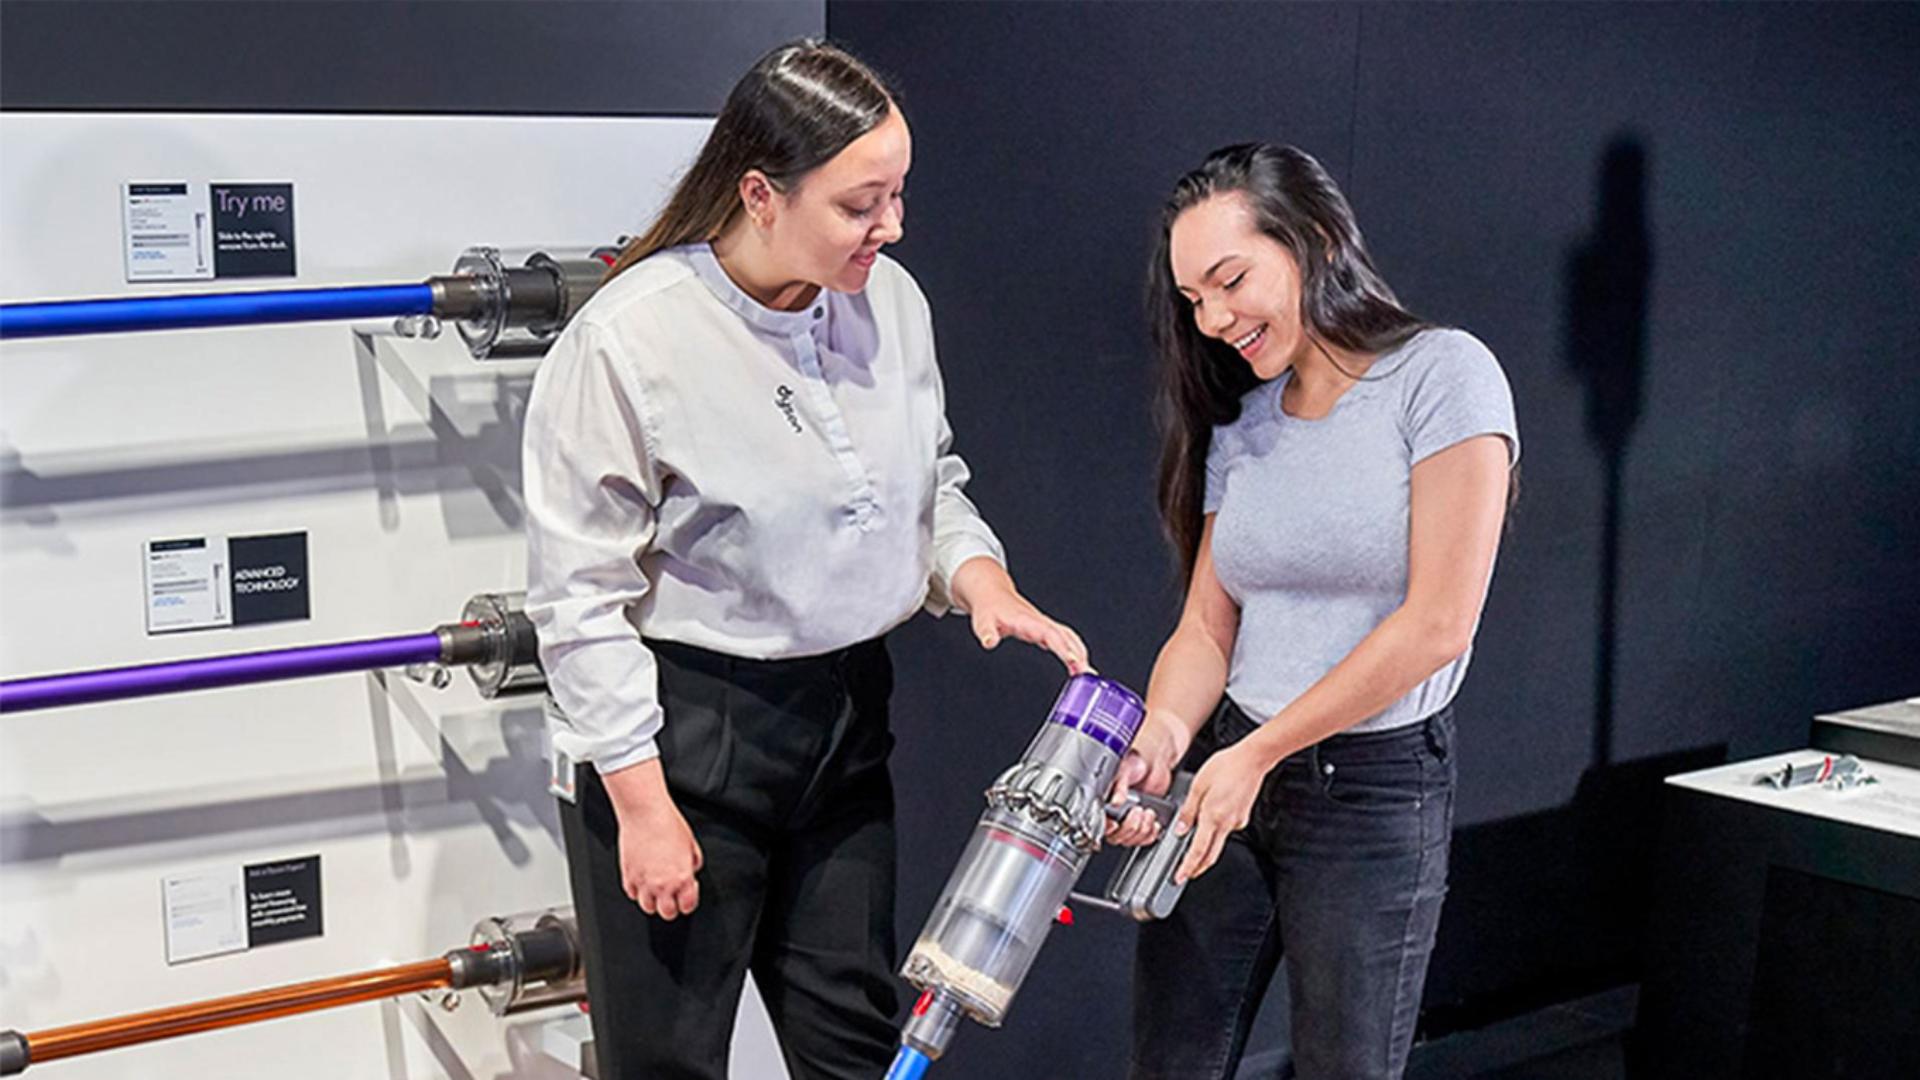 Dyson stylist helping someone with a demo